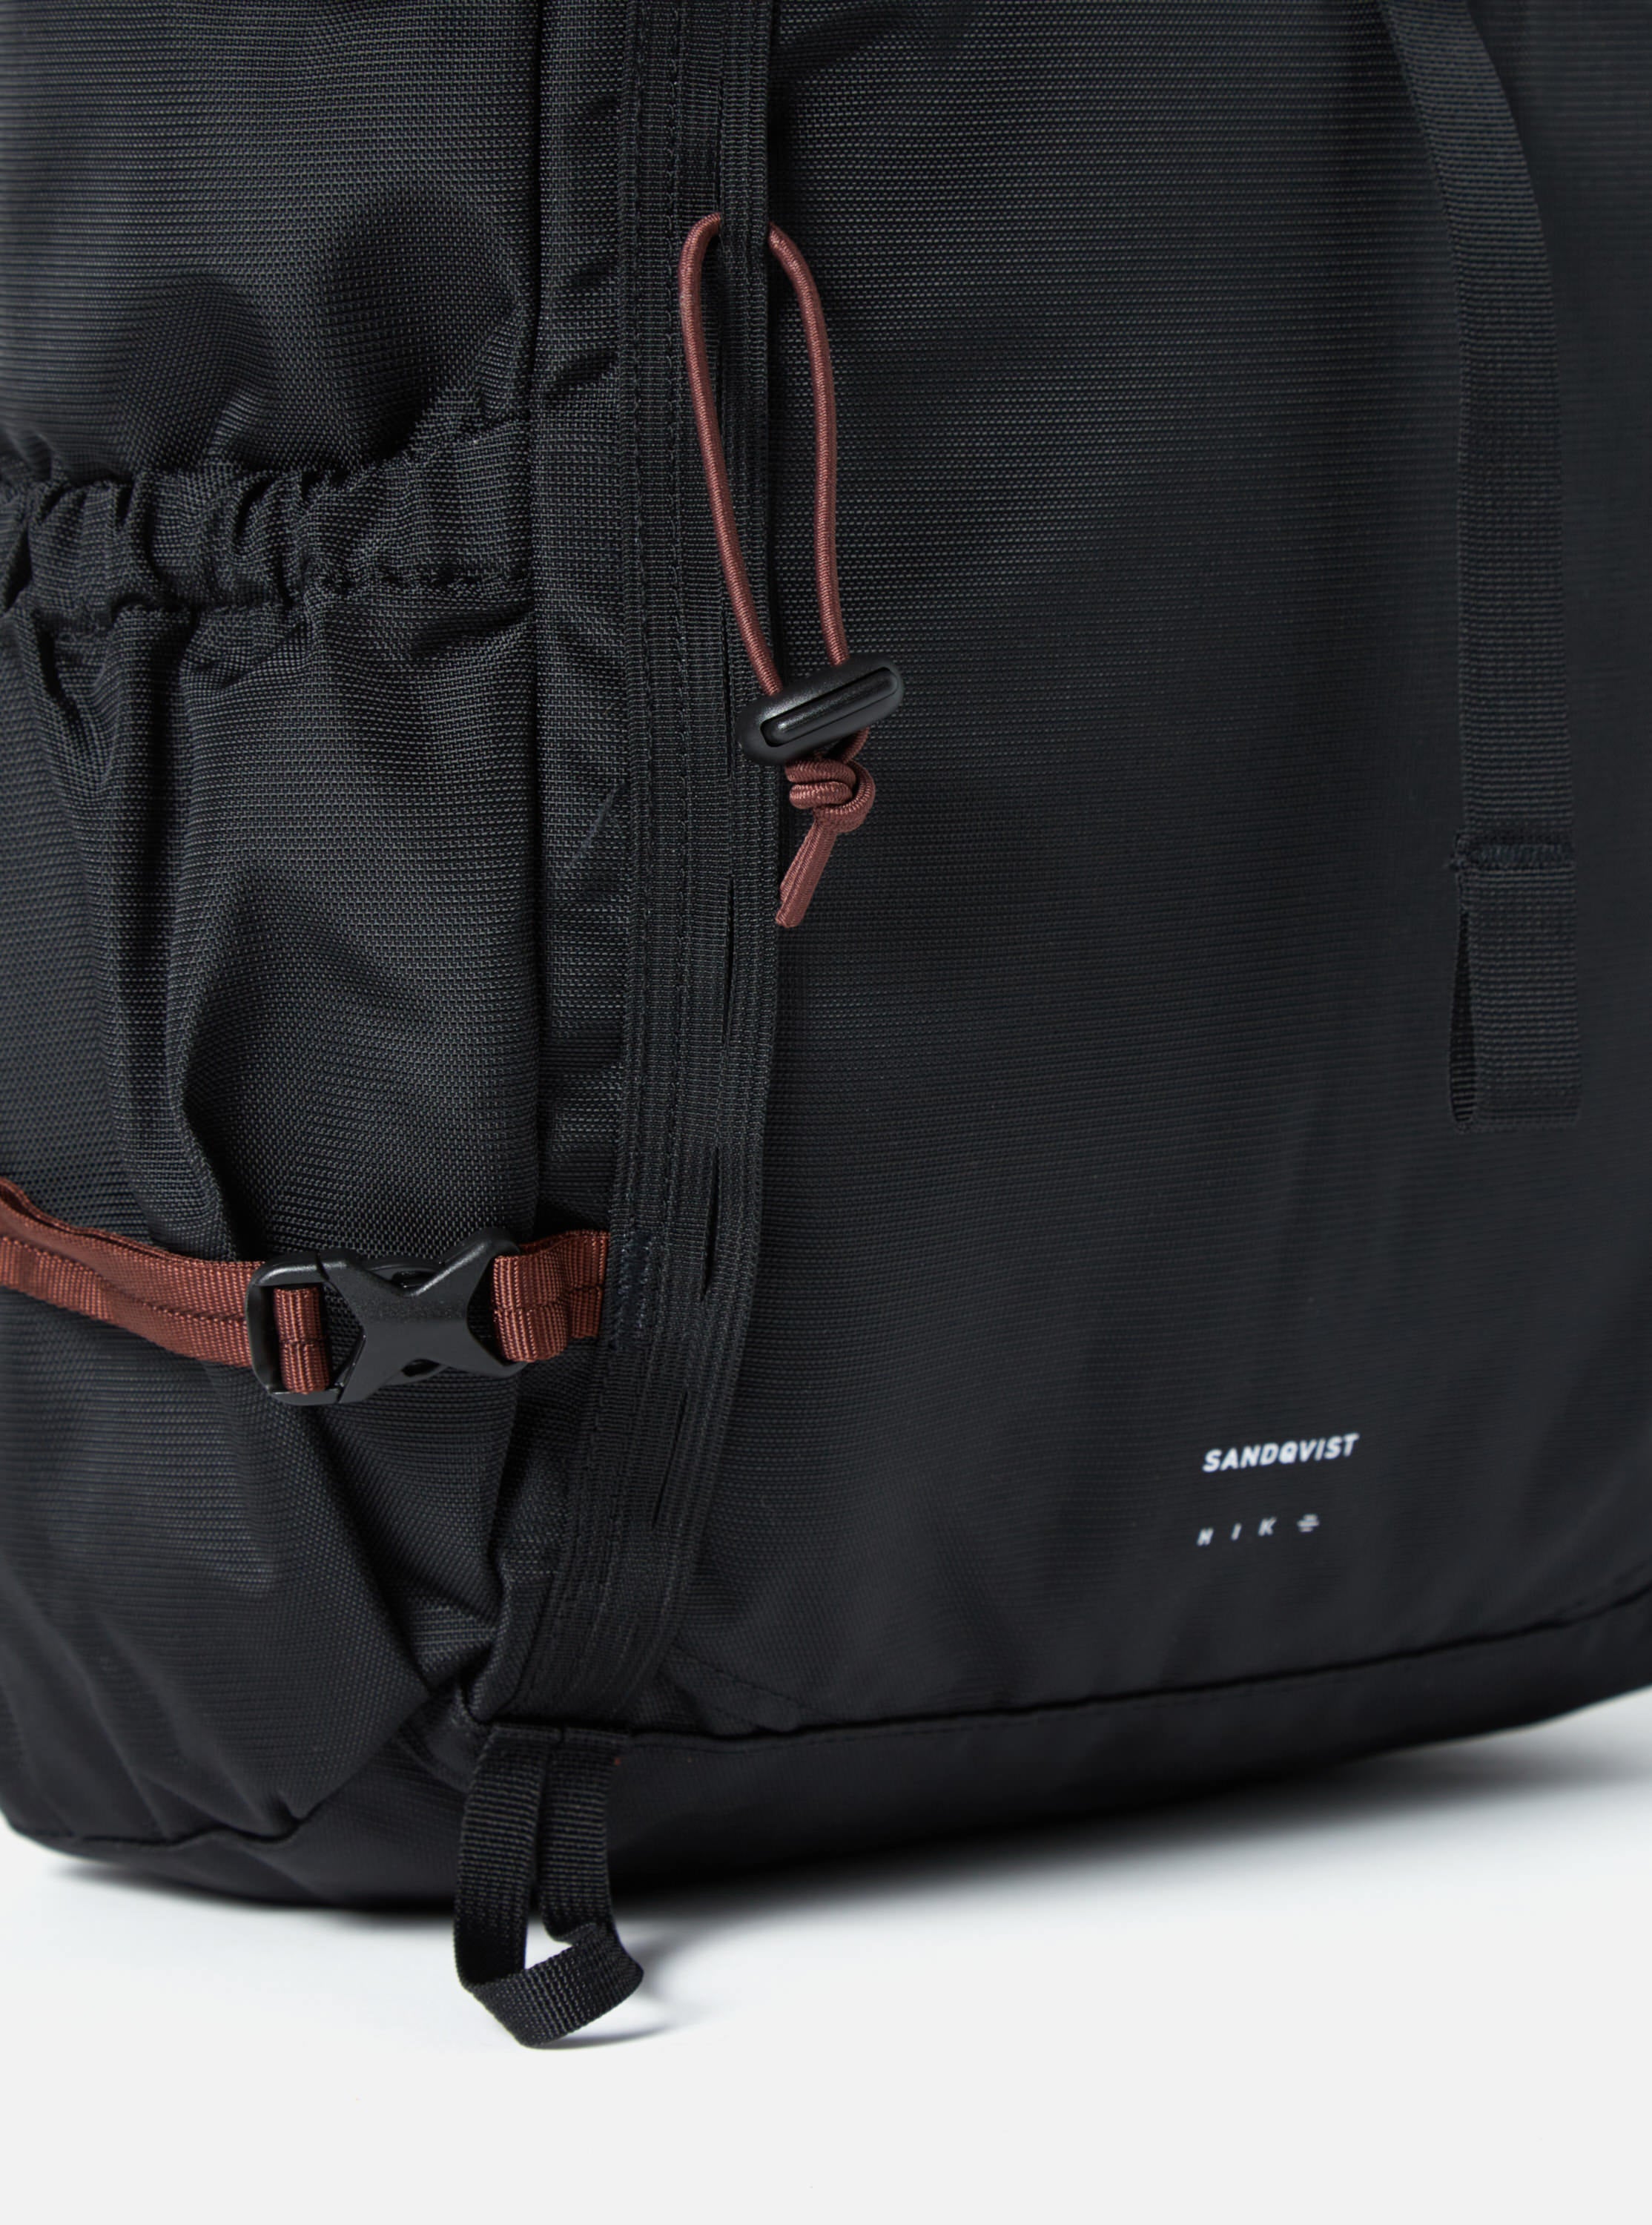 Sandqvist Forest Hike Backpack in Black Recycled Nylon